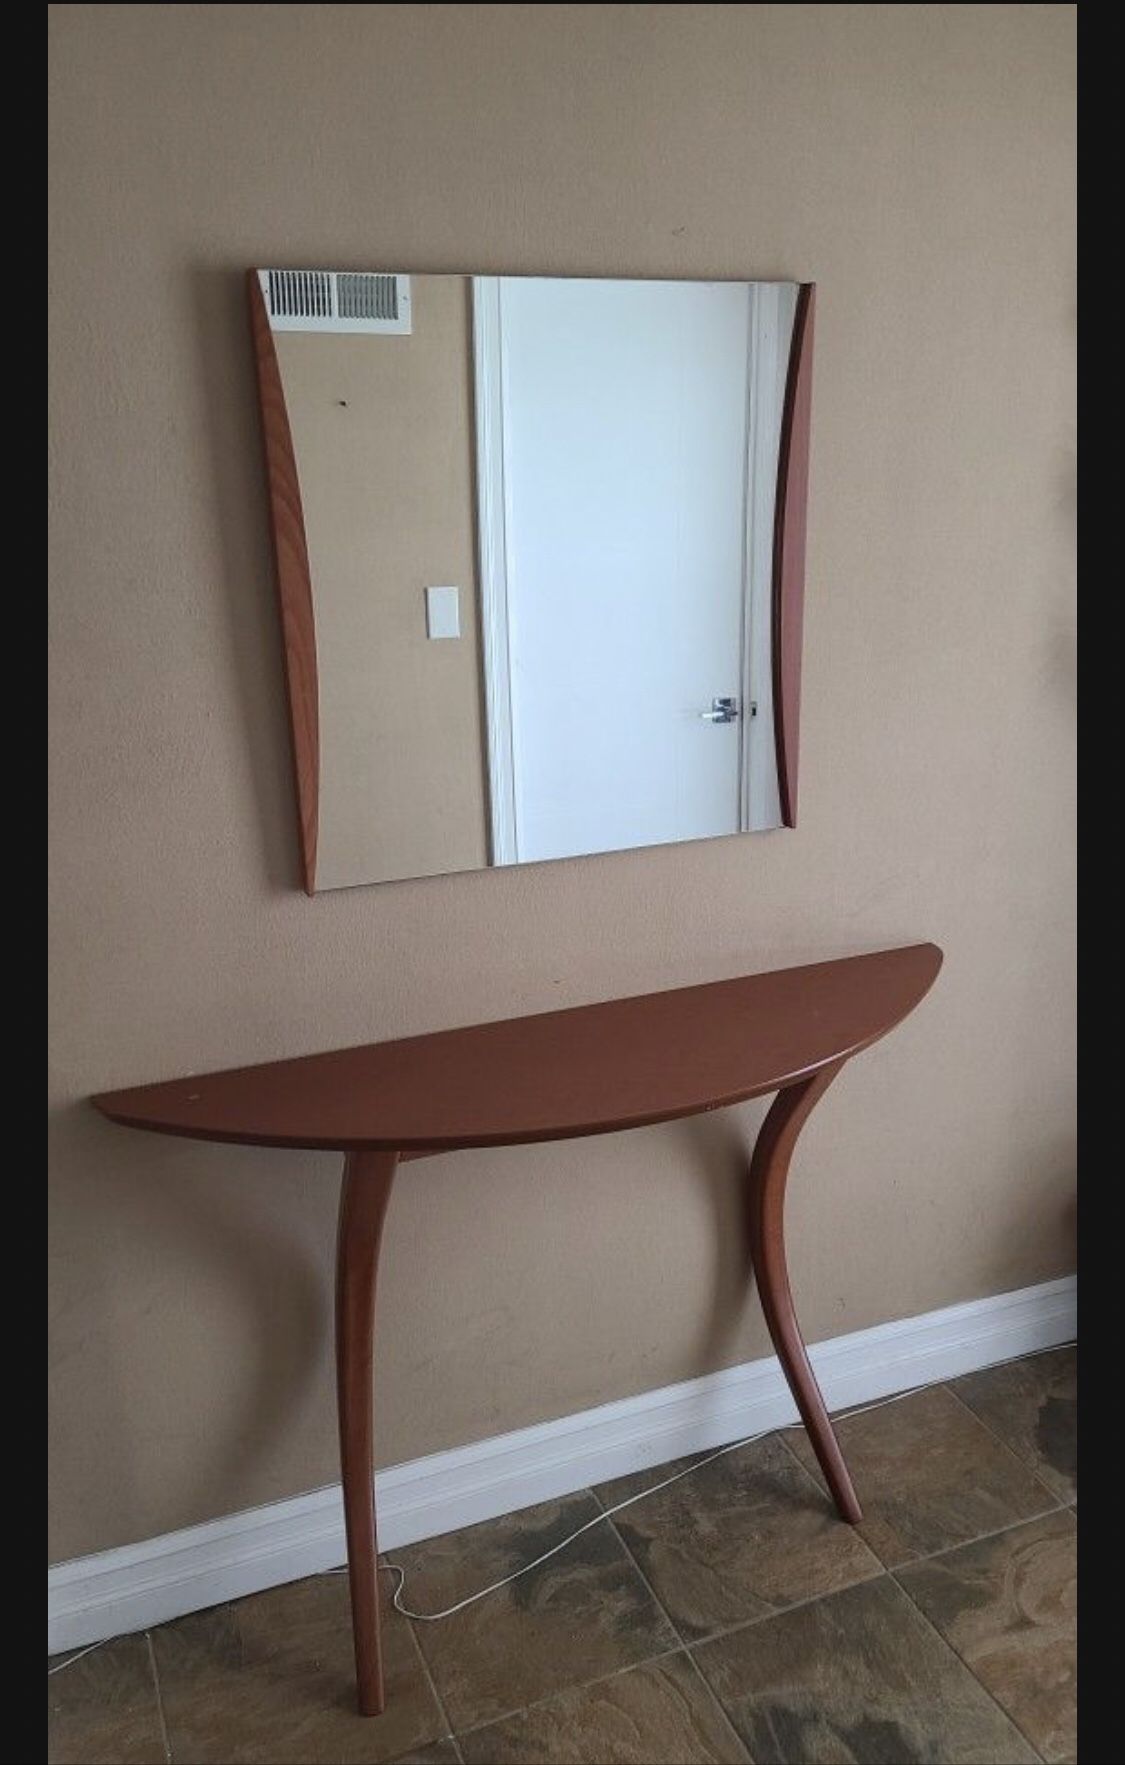 Entry way table and mirror